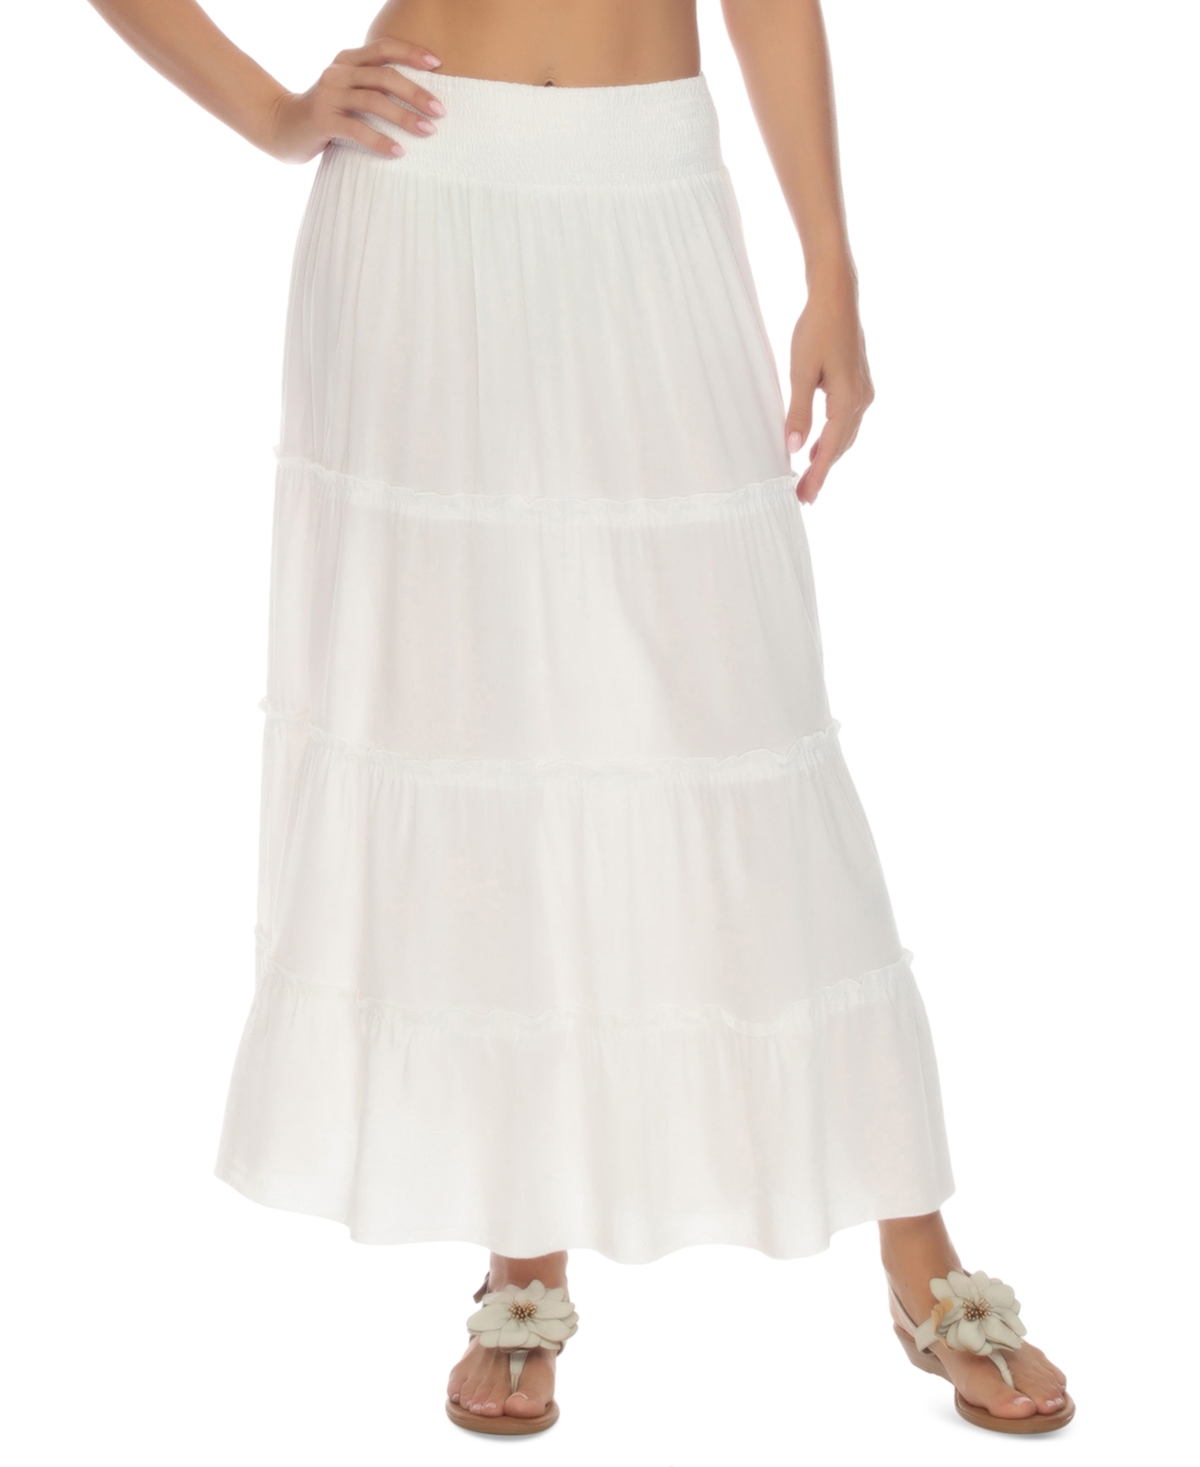 Women's Smocked-Waist Tiered Skirt Cover-Up - White